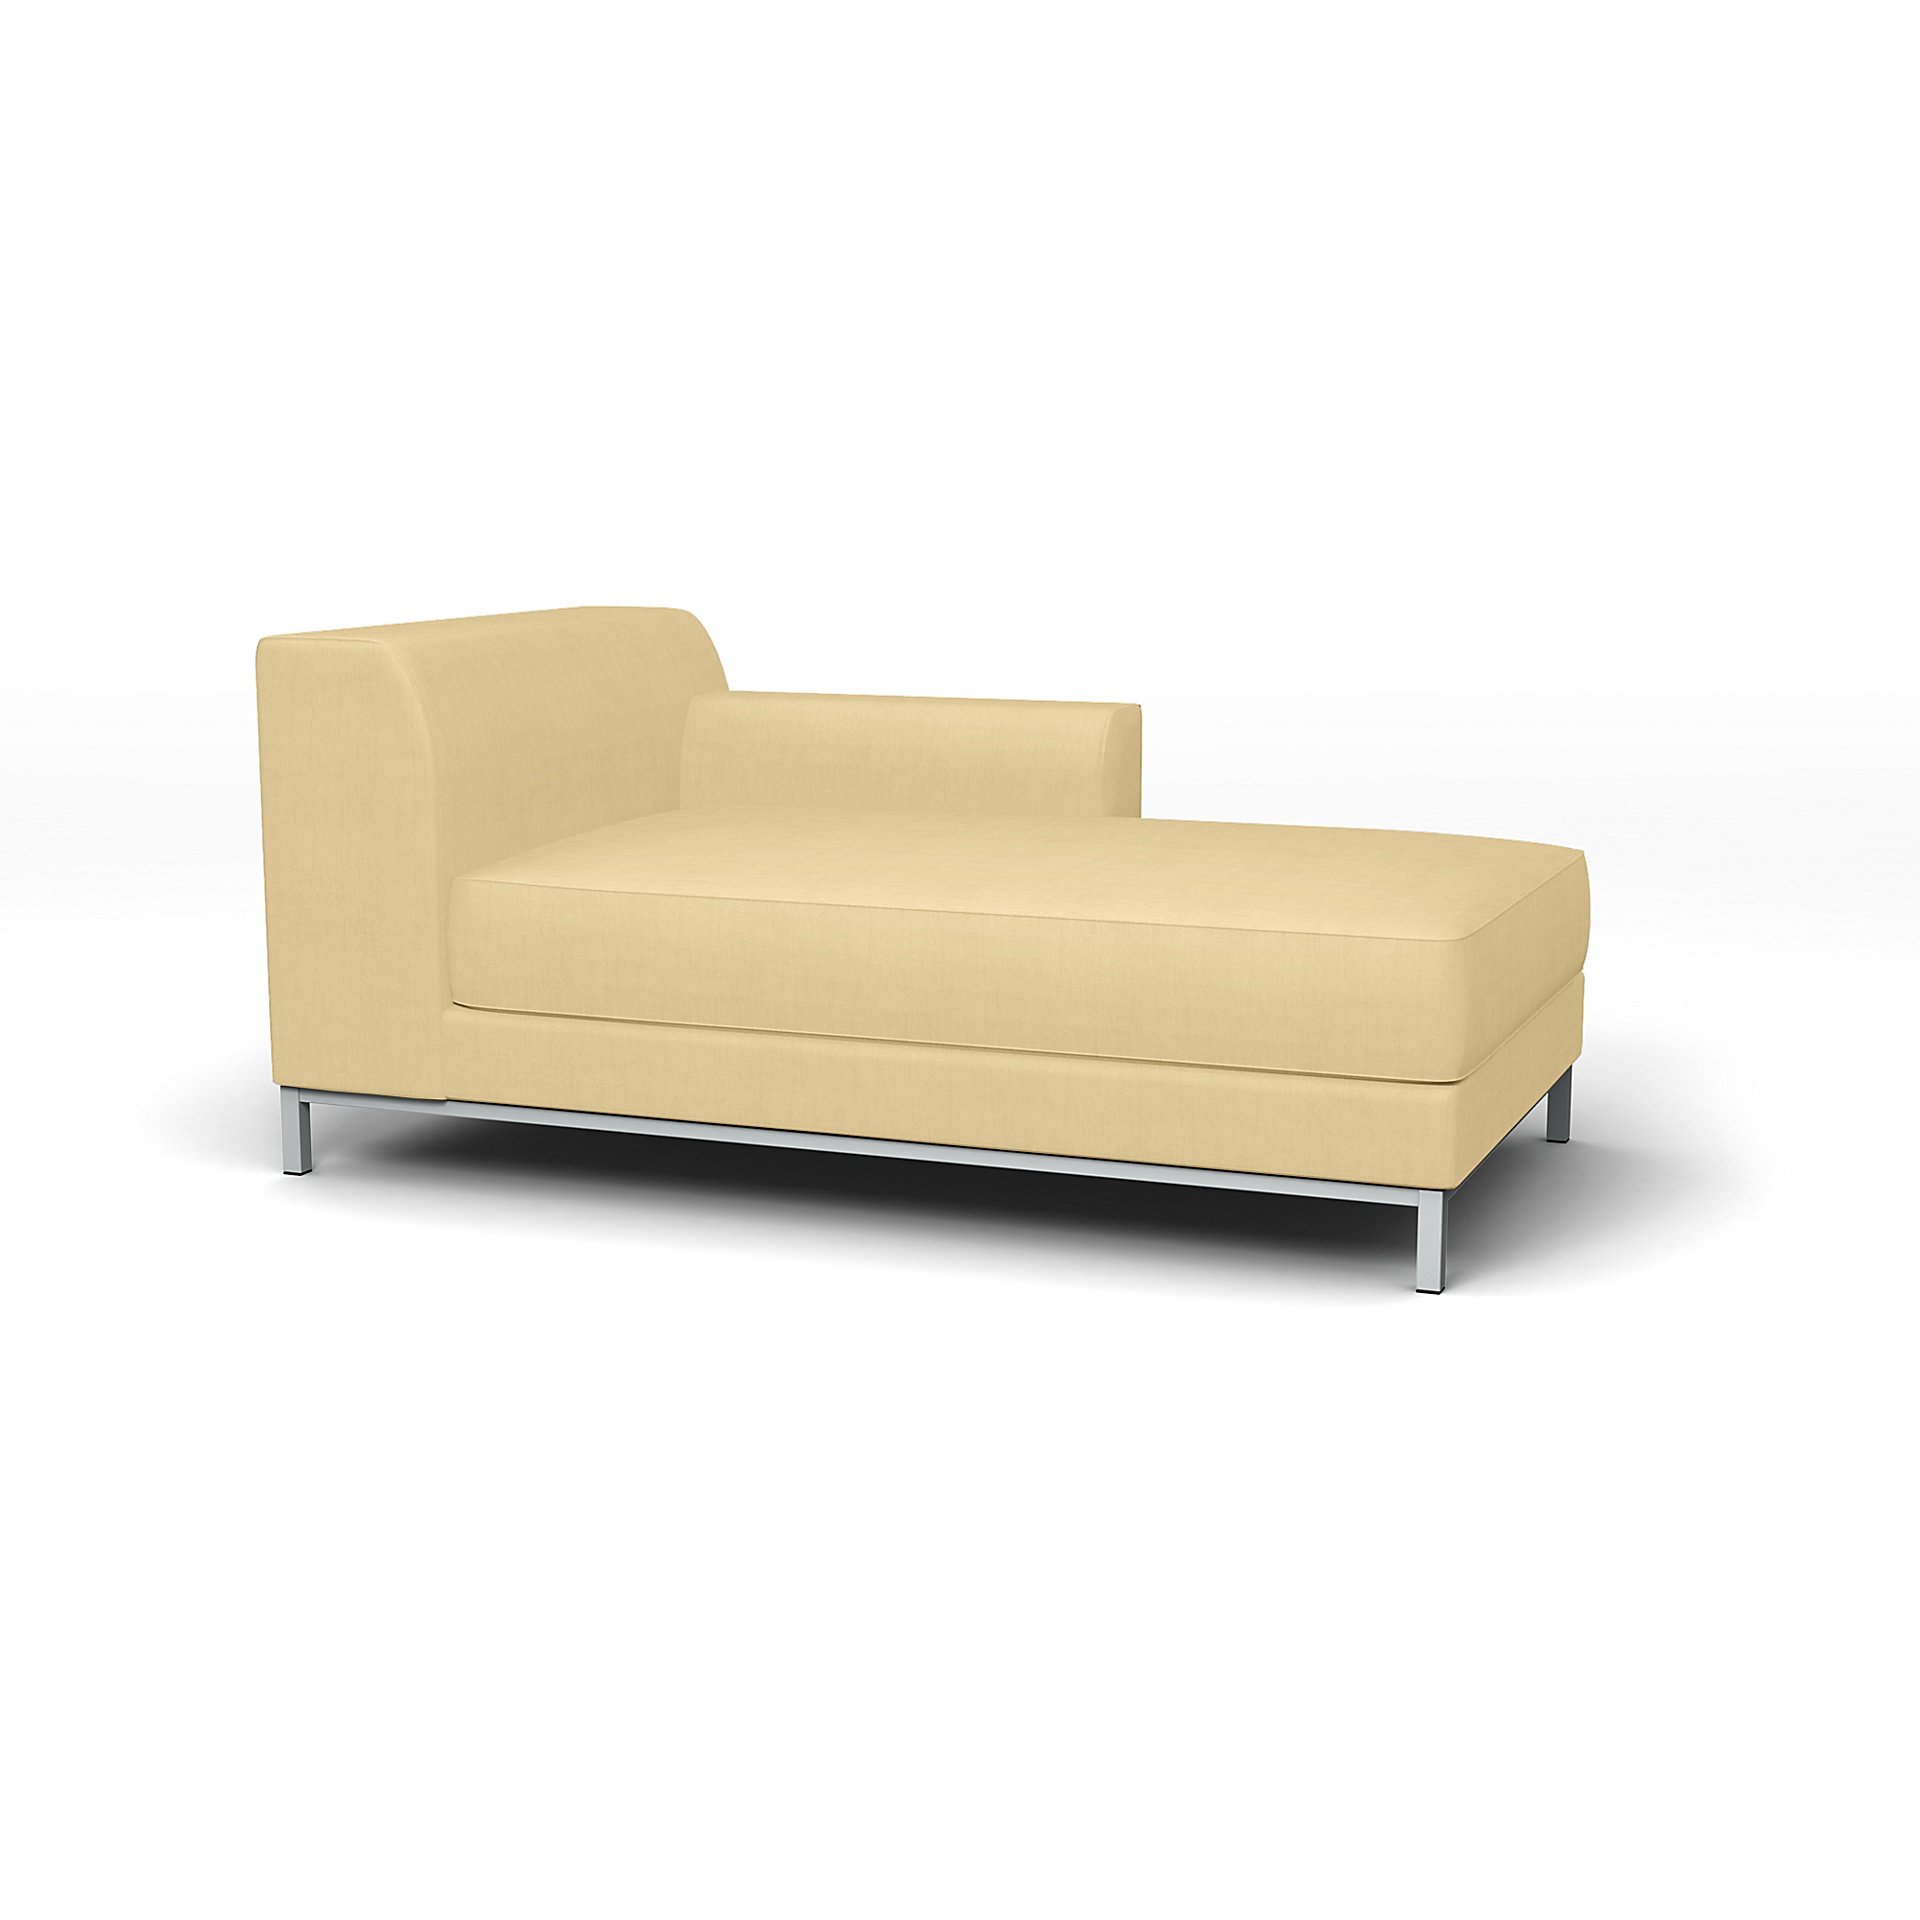 IKEA - Kramfors Chaise Longue with Right Arm Cover, Straw Yellow, Linen - Bemz